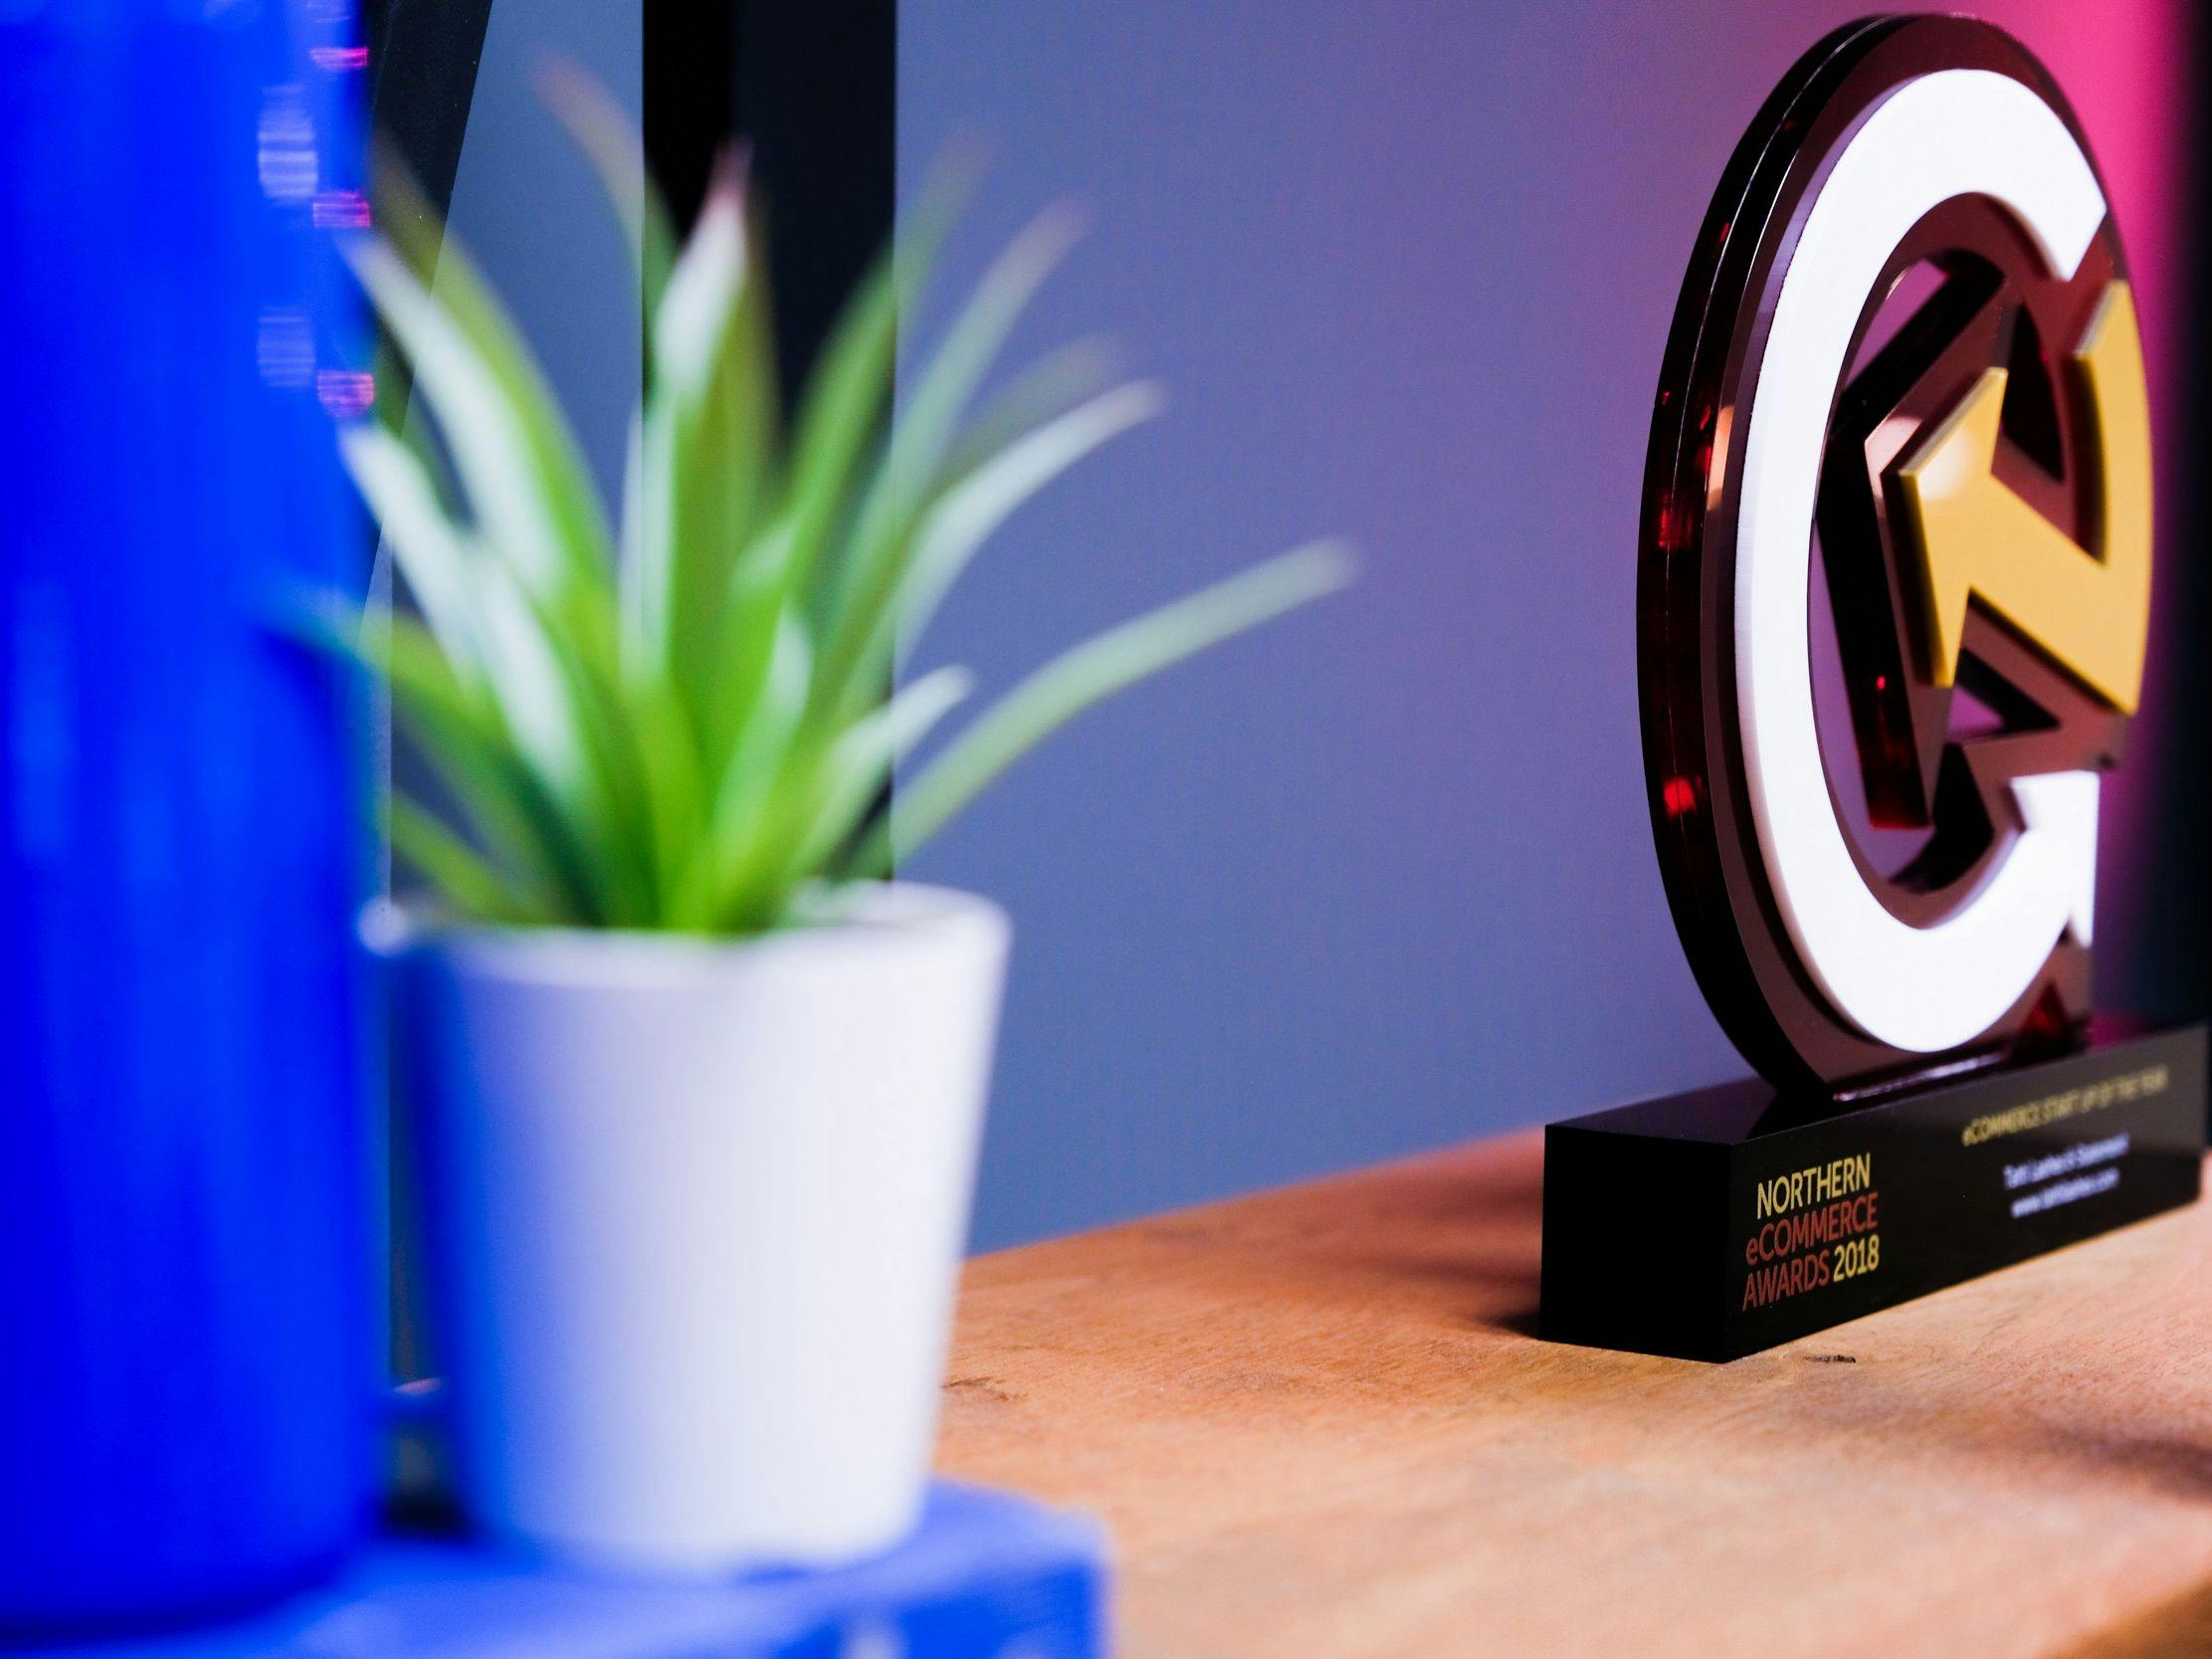 Northern Ecommerce Awards trophy